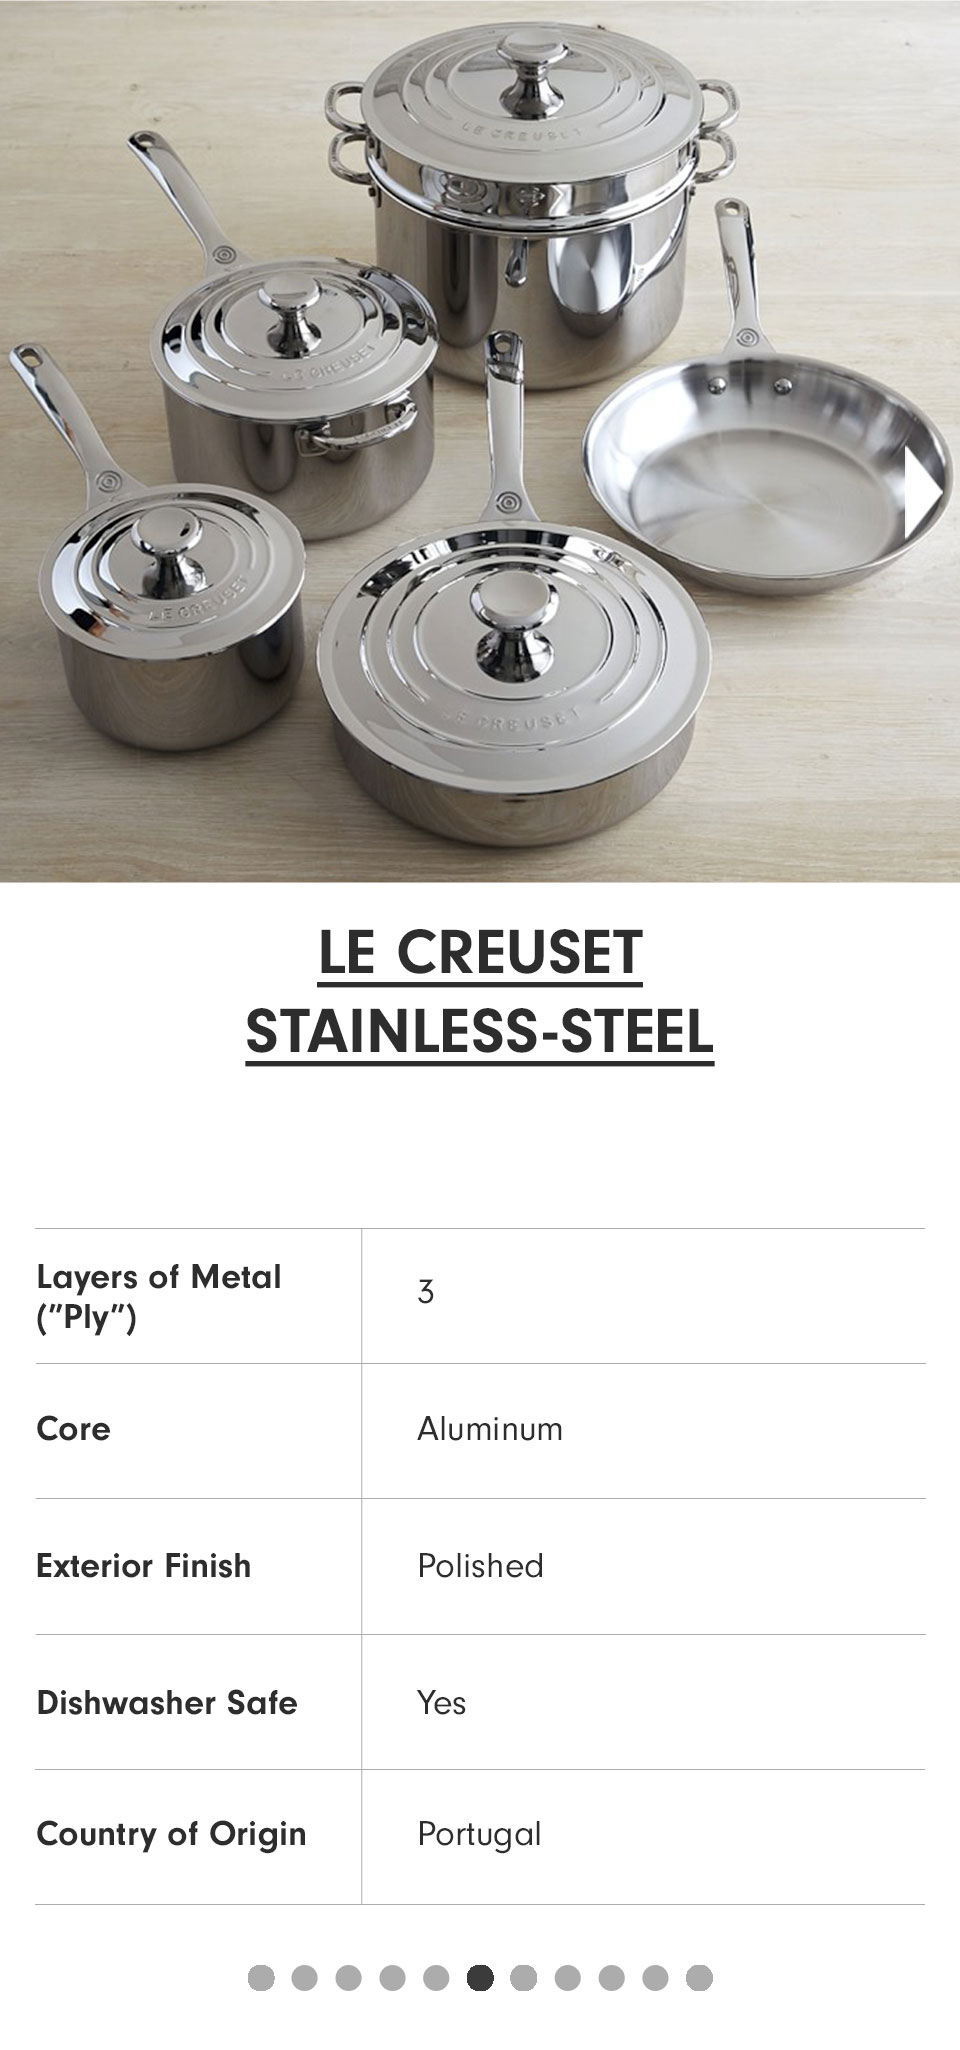 Le Creuset Stainless-Steel >